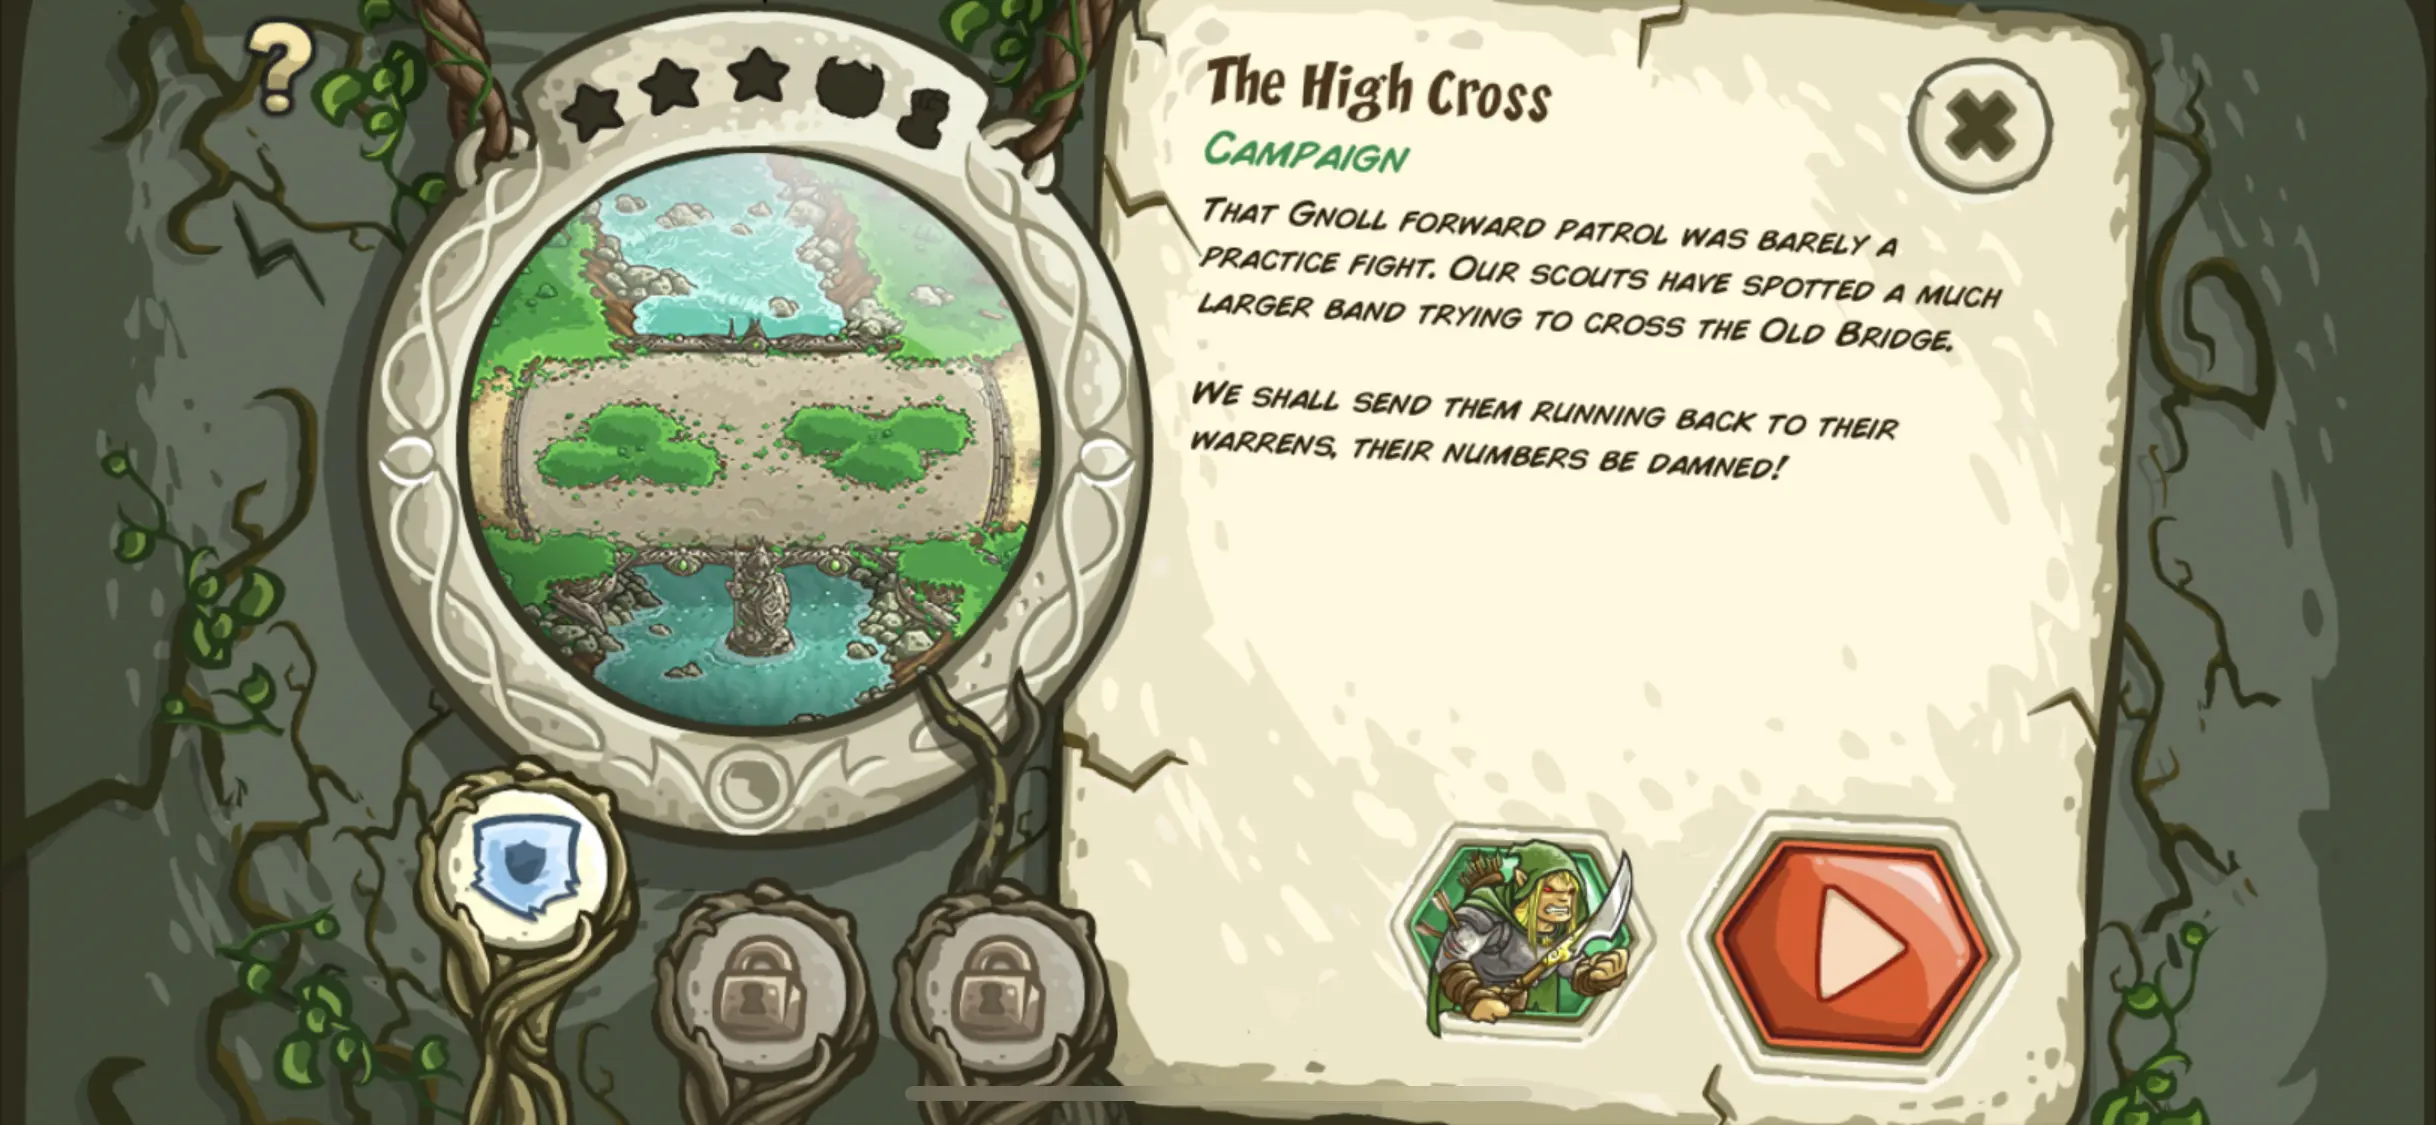 Menu Select for the High Cross level with options to adjust difficult, exit, or start the level